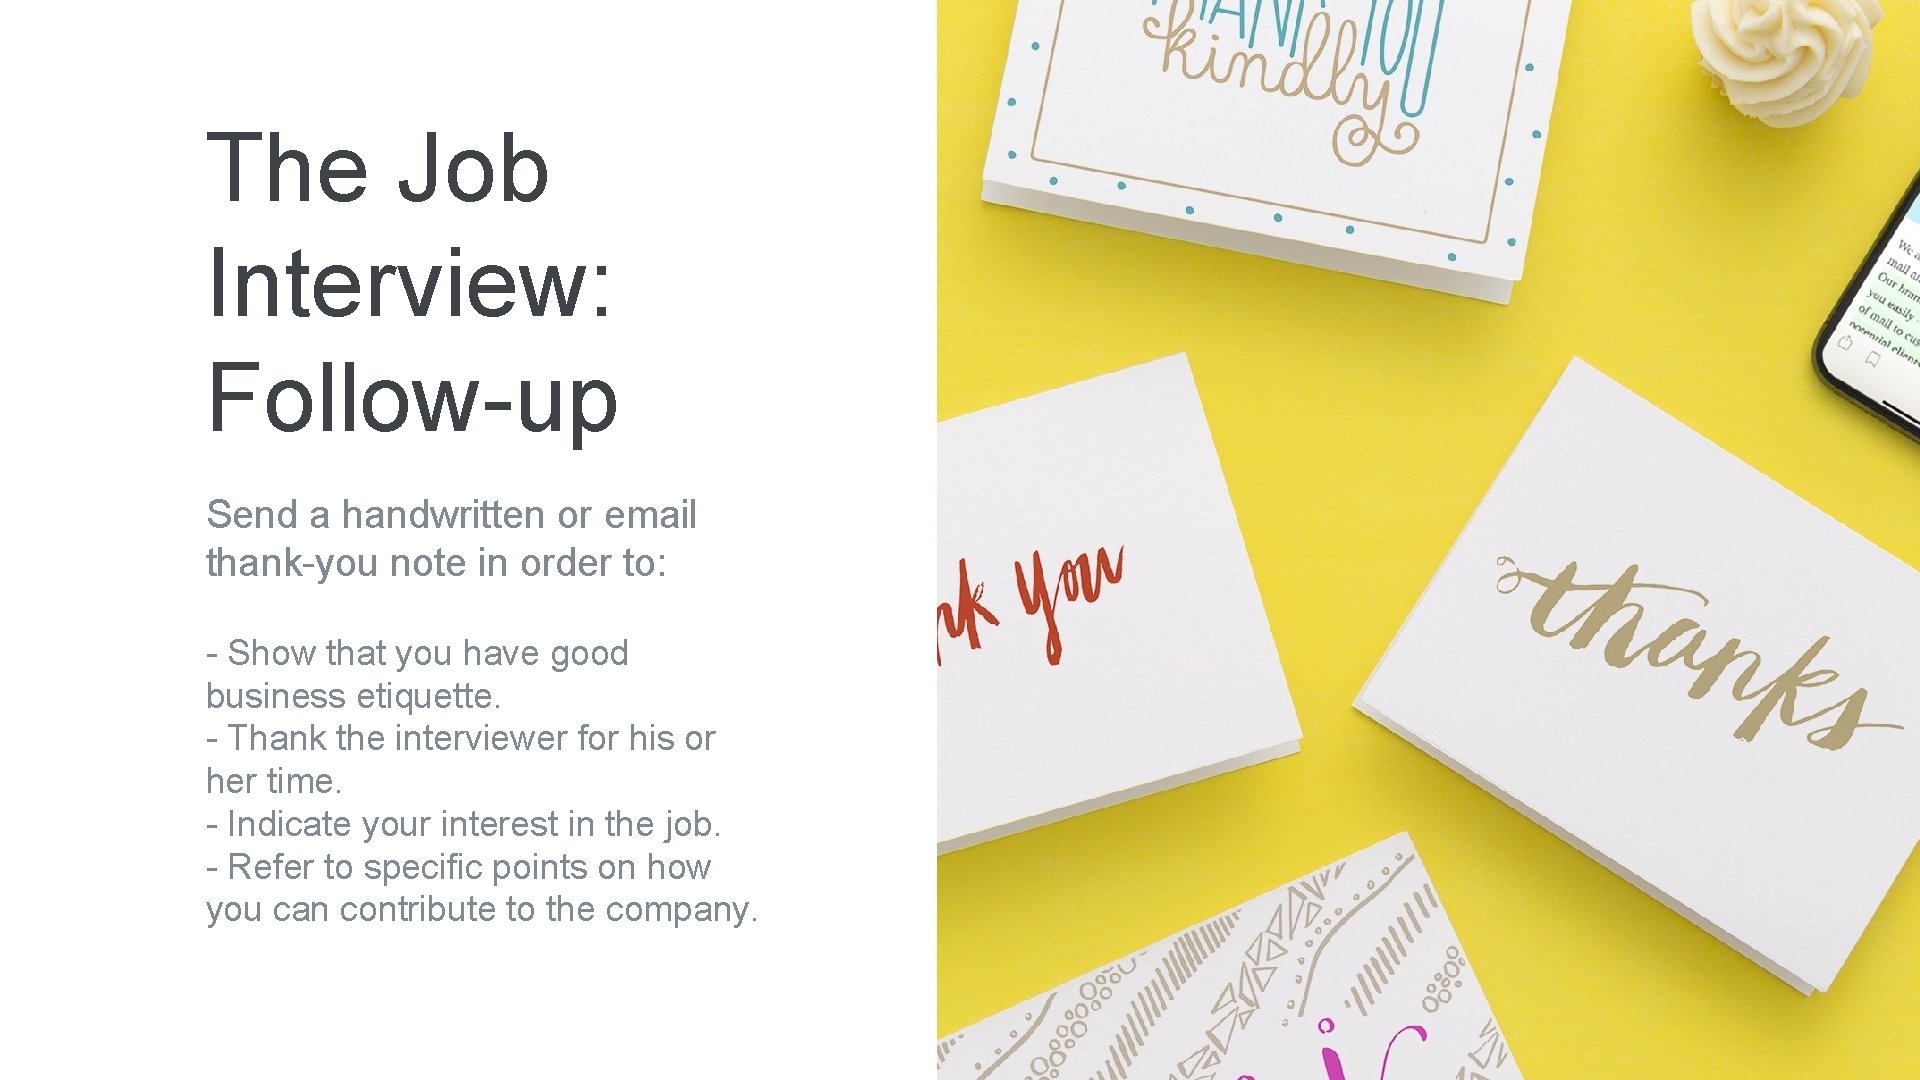 The Job Interview: Follow-up Send a handwritten or email thank-you note in order to: